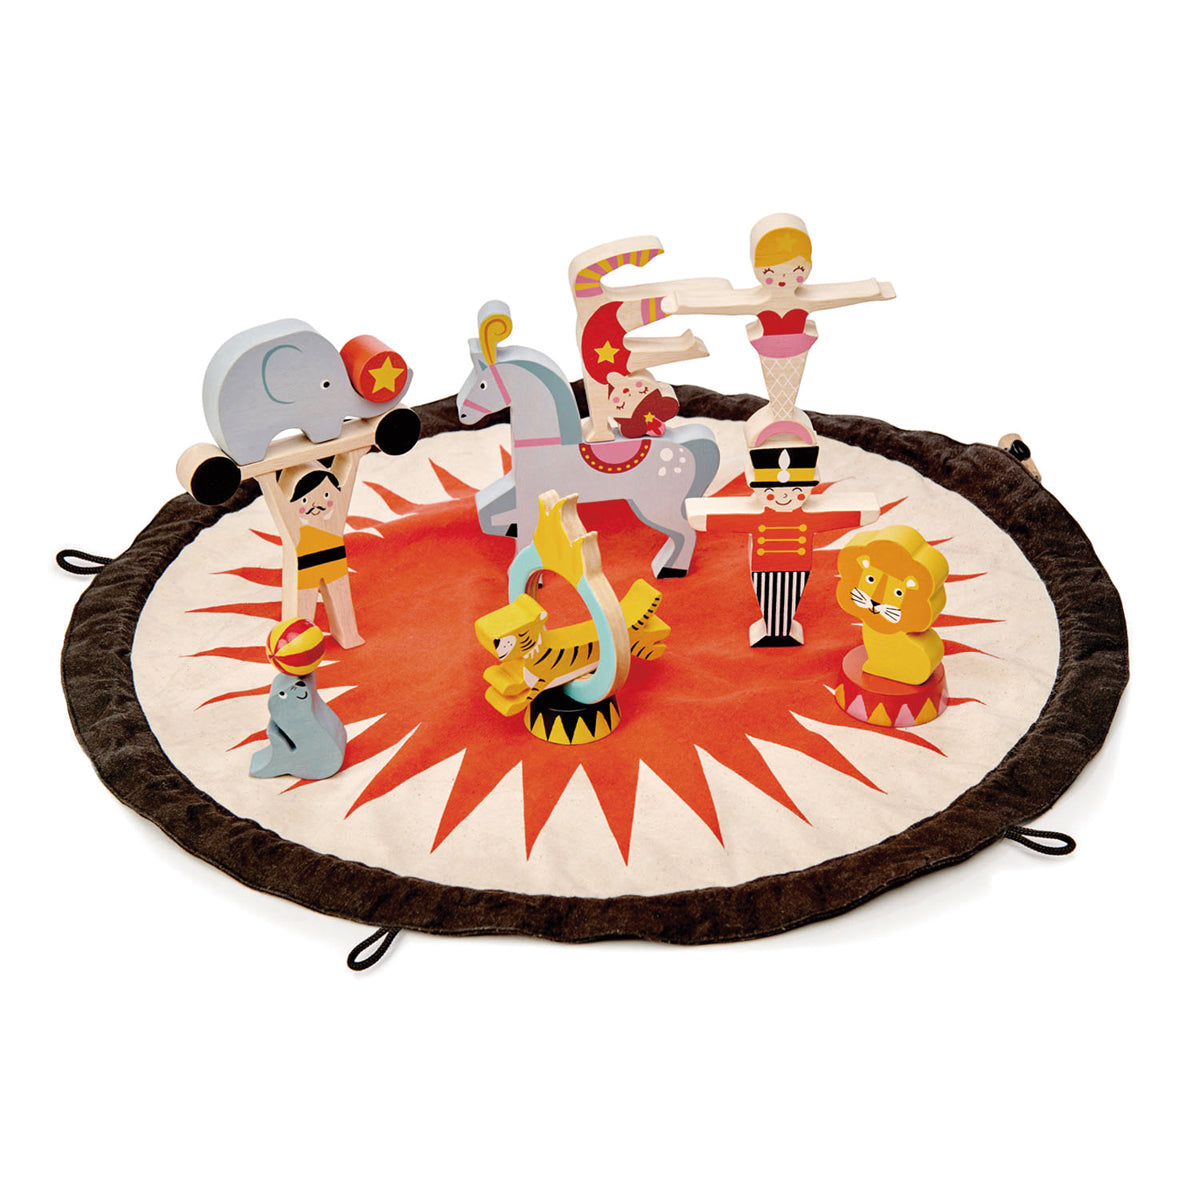 Tender Leaf Toys - Circus Stacker